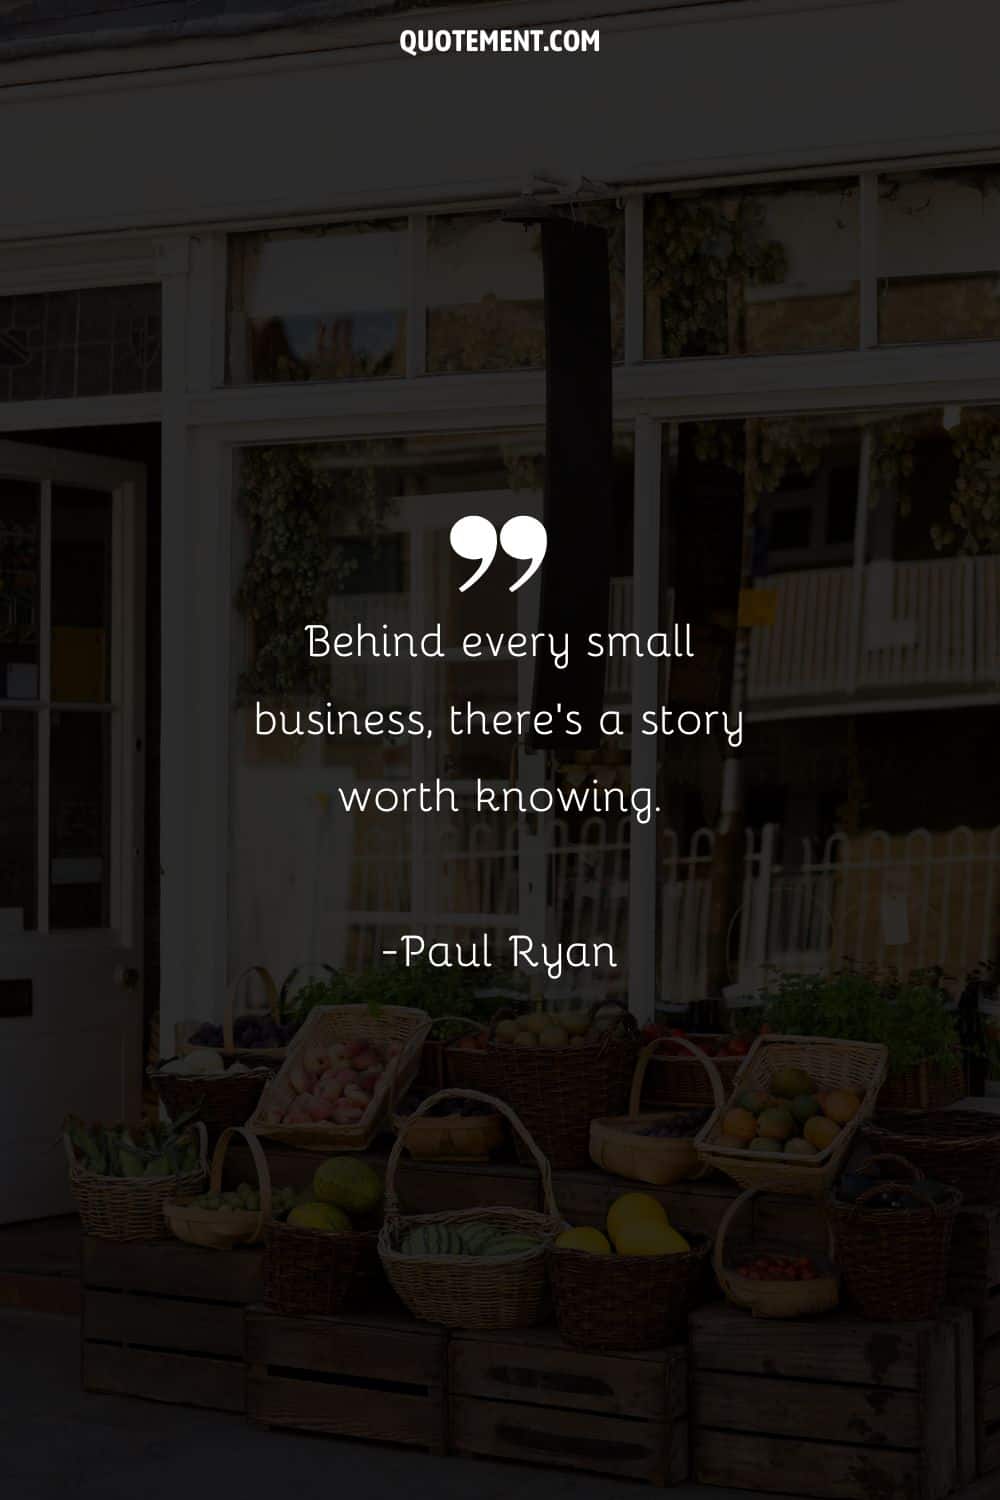 Deep quote about small businesses and a shop in the background.